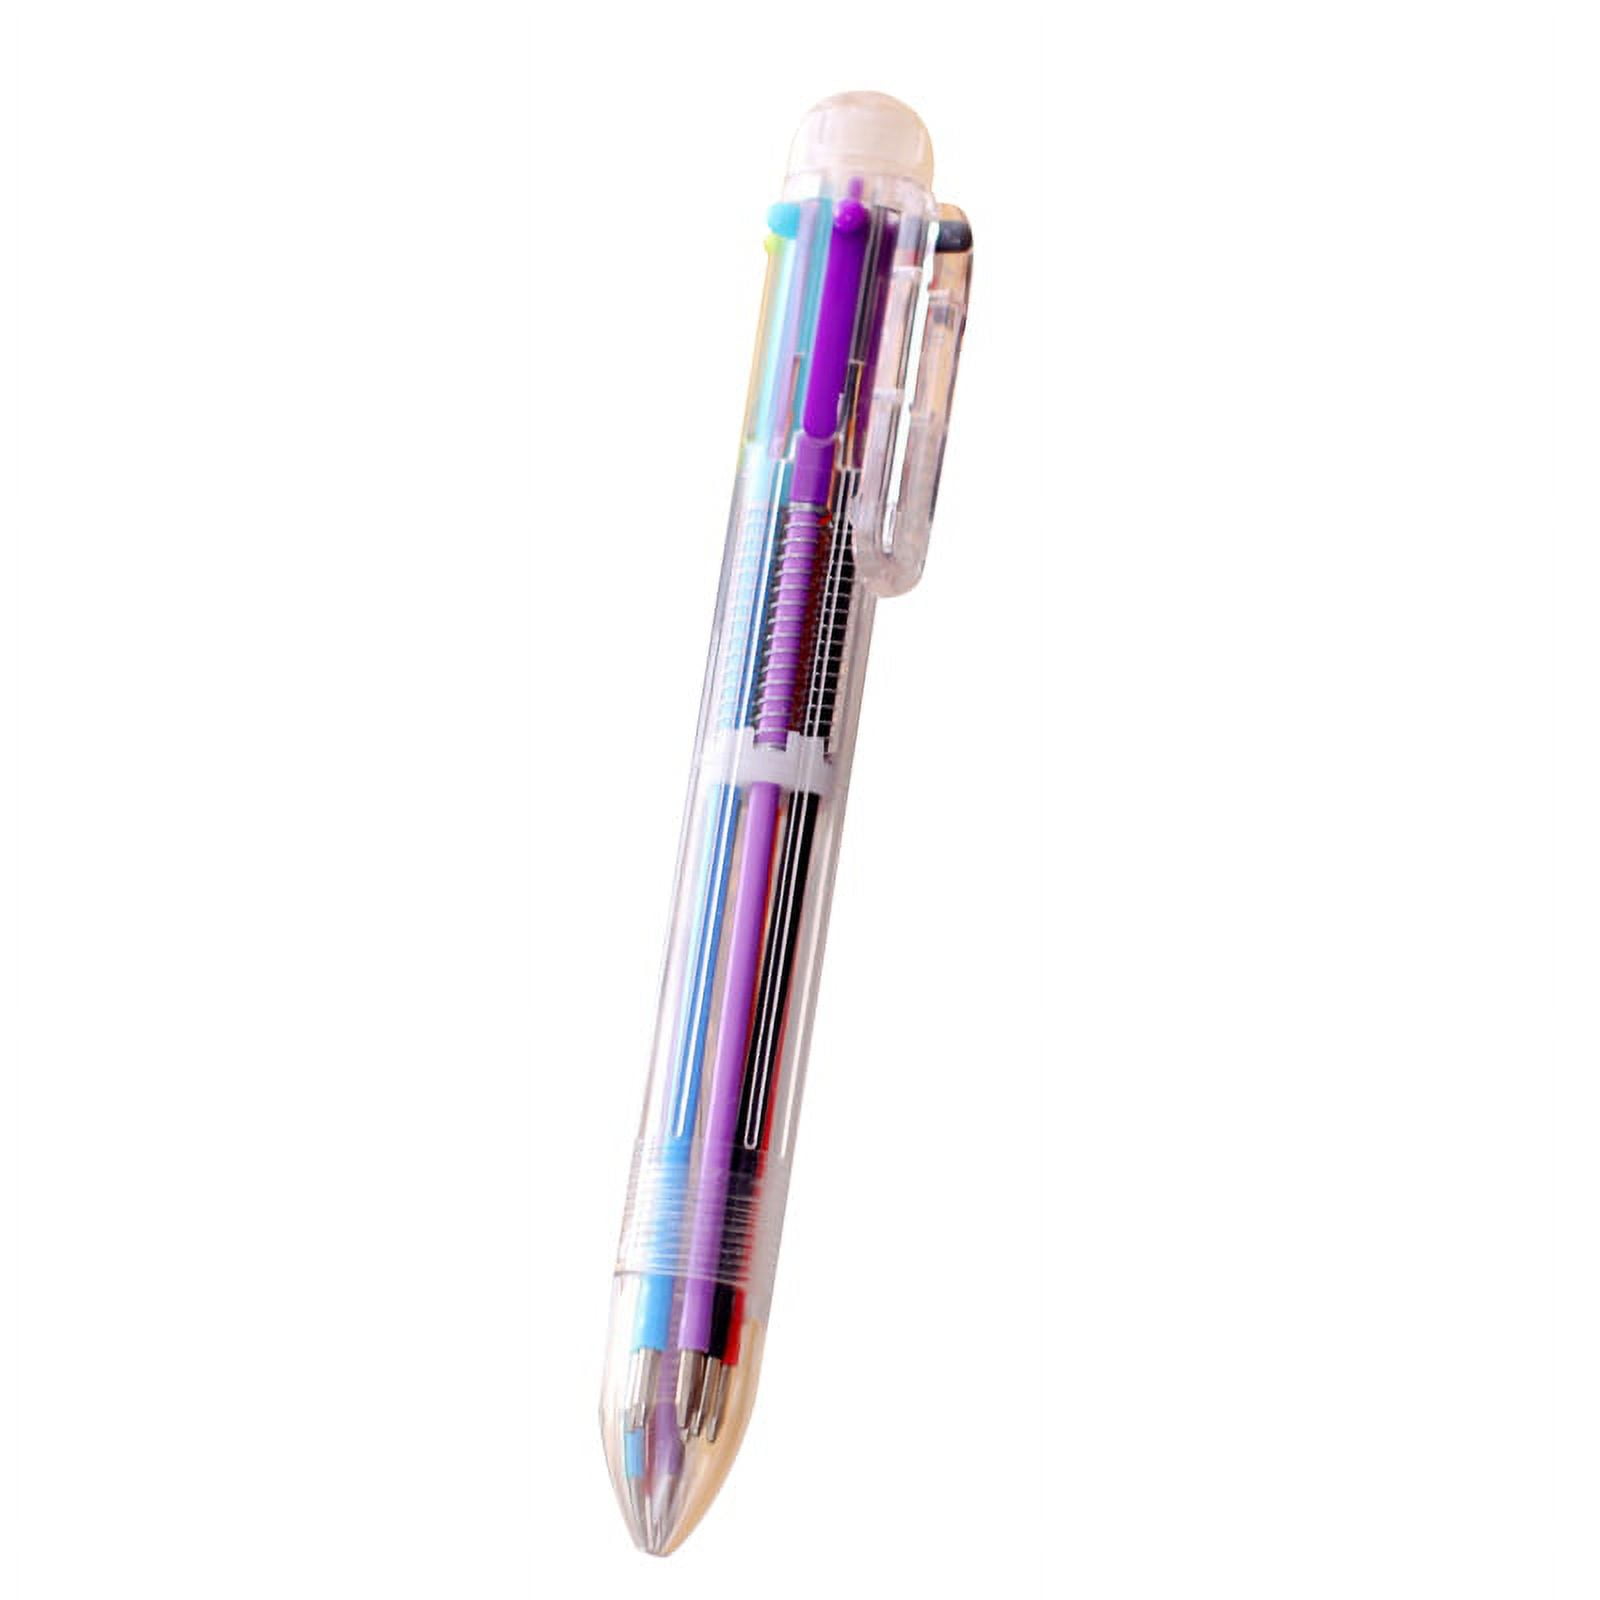 Hieno Supplies Multicolor Pens - 24 Pack of 6-in-1 Ballpoint Pens - 6 Vivid  Colors in Every Pen 